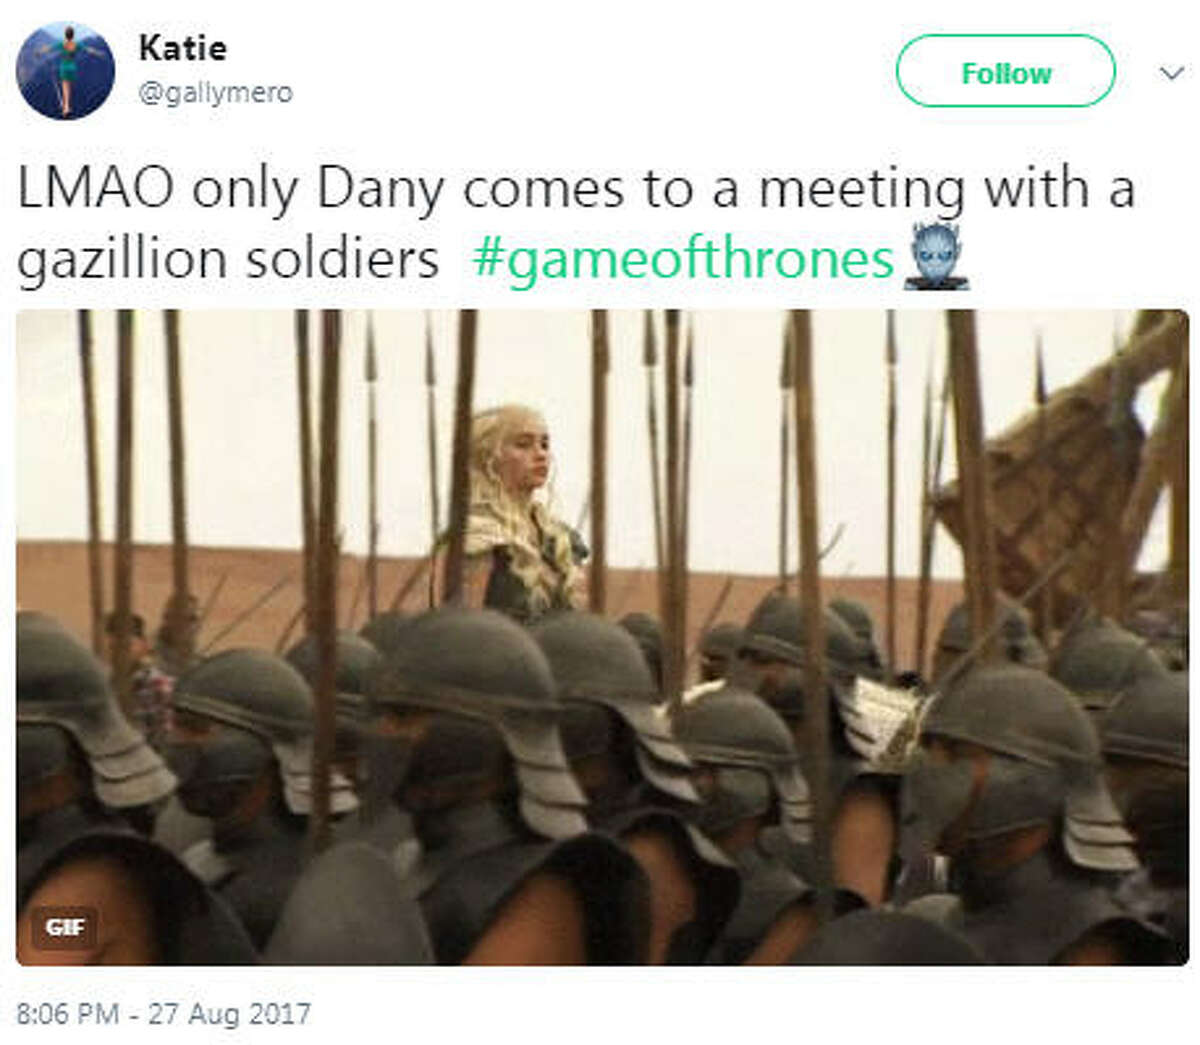 "LMAO only Dany comes to a meeting with a gazillion soldiers #gameofthrones" Source: Twitter